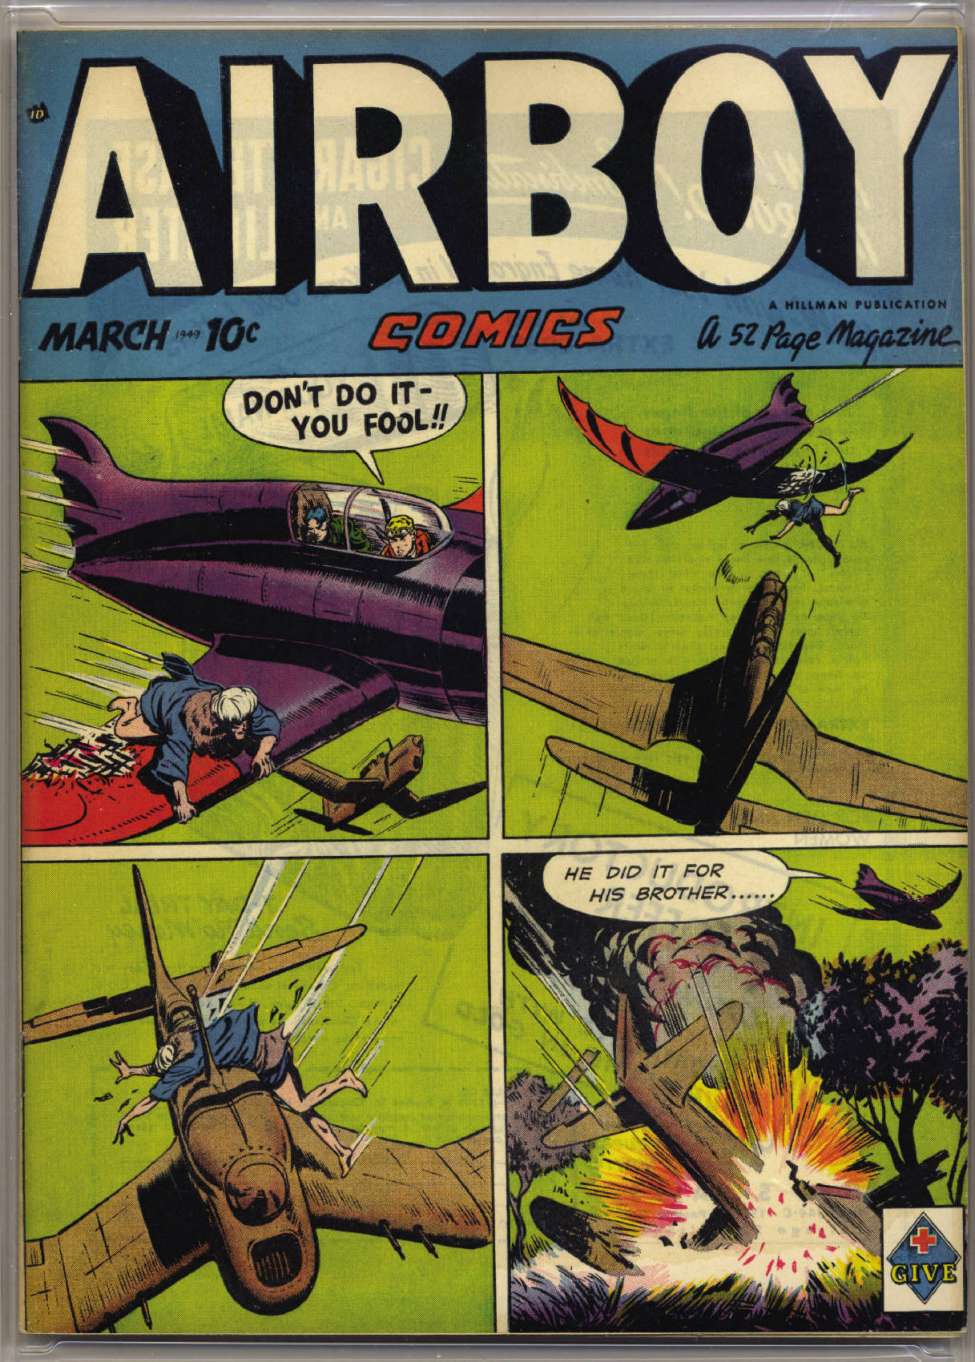 Book Cover For Airboy Comics v6 2